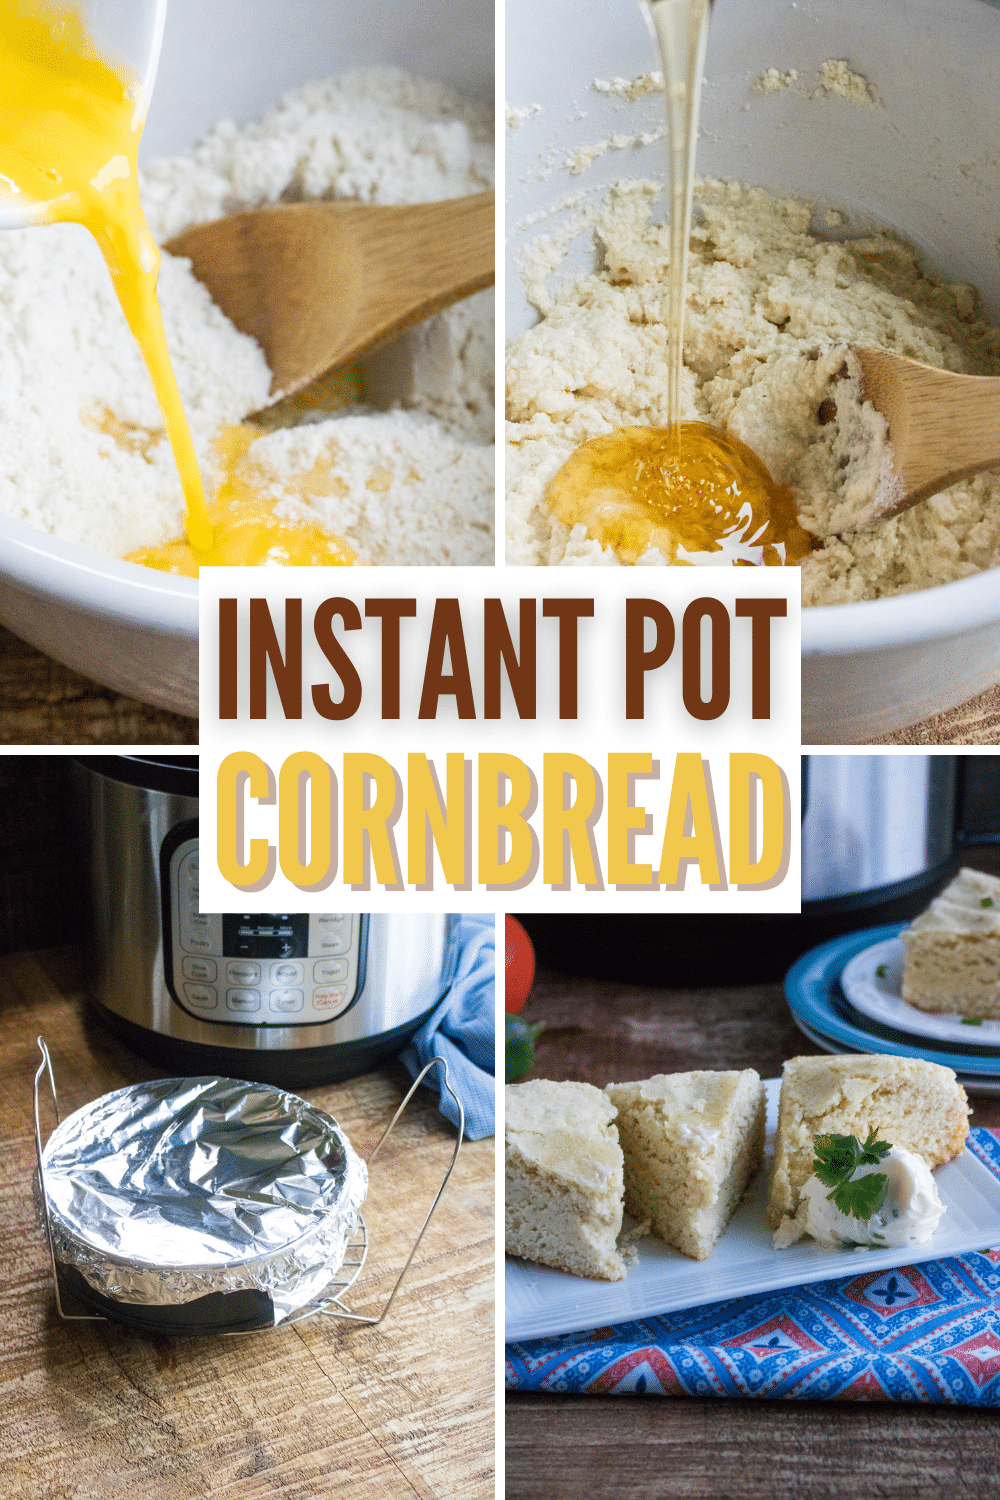 Instant Pot Cornbread is a southern classic with a pressure cooker twist. No need to heat up the oven when you're craving this comfort food. #instantpot #pressurecooker #instantpotcornbread #cornbread #recipe via @wondermomwannab